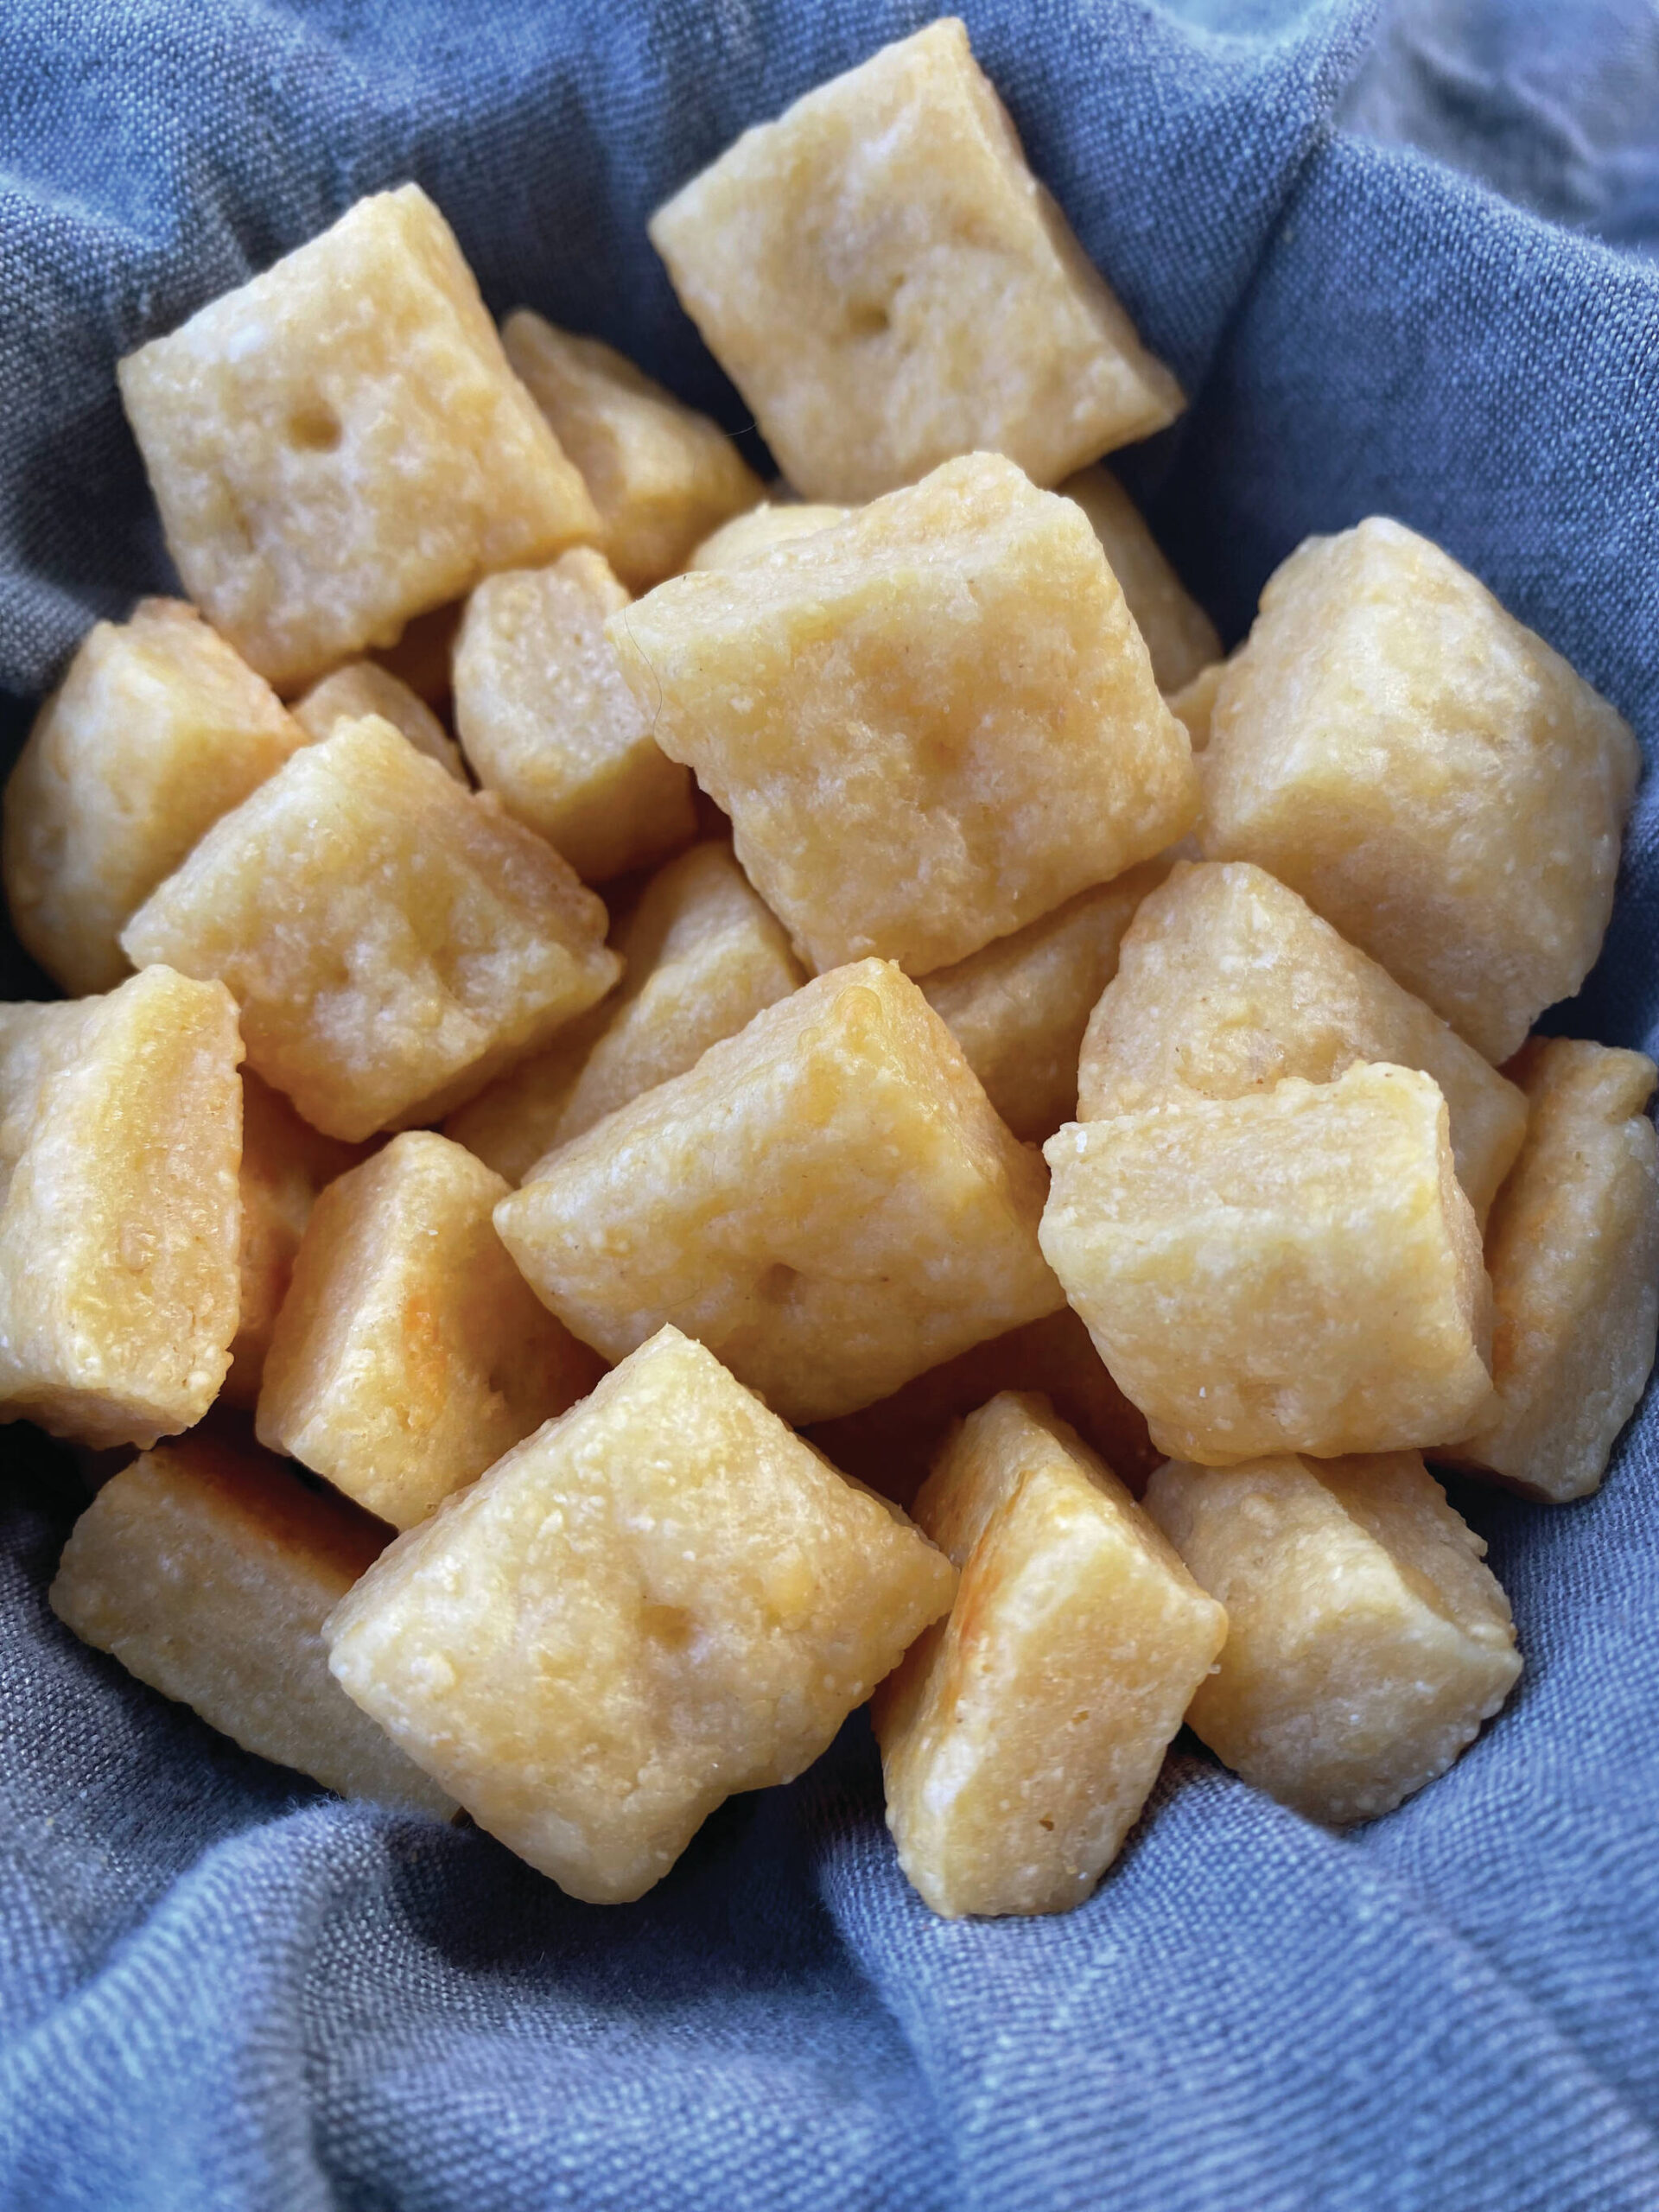 These cheesy crackers are easy to make at home and come without the dyes or preservatives of a store-bought brand. (Photo by Tressa Dale/Peninsula Clarion)